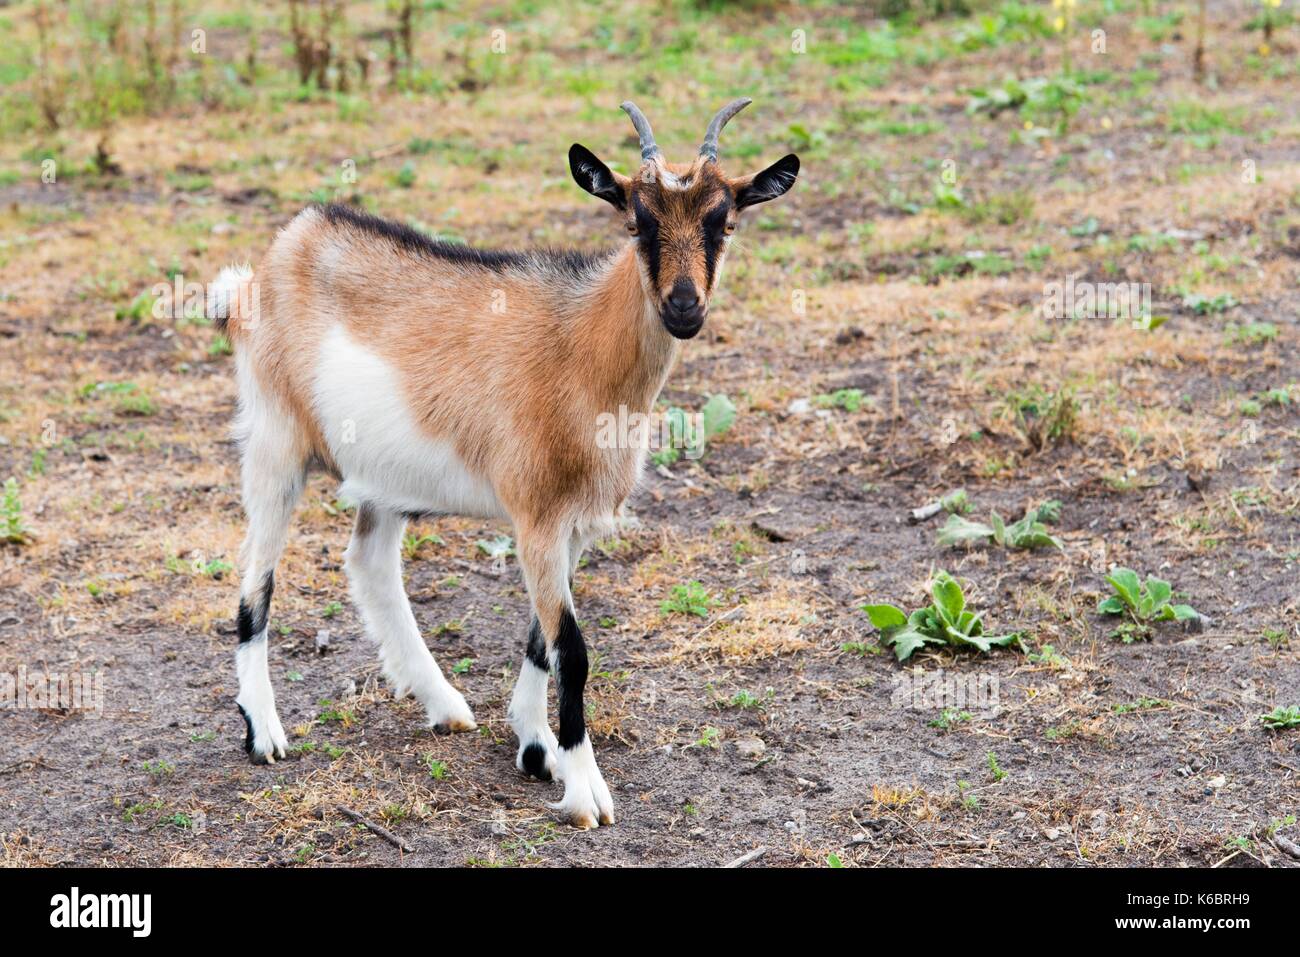 Kinder goat stands. The Kinder goat stands in the field. Stock Photo